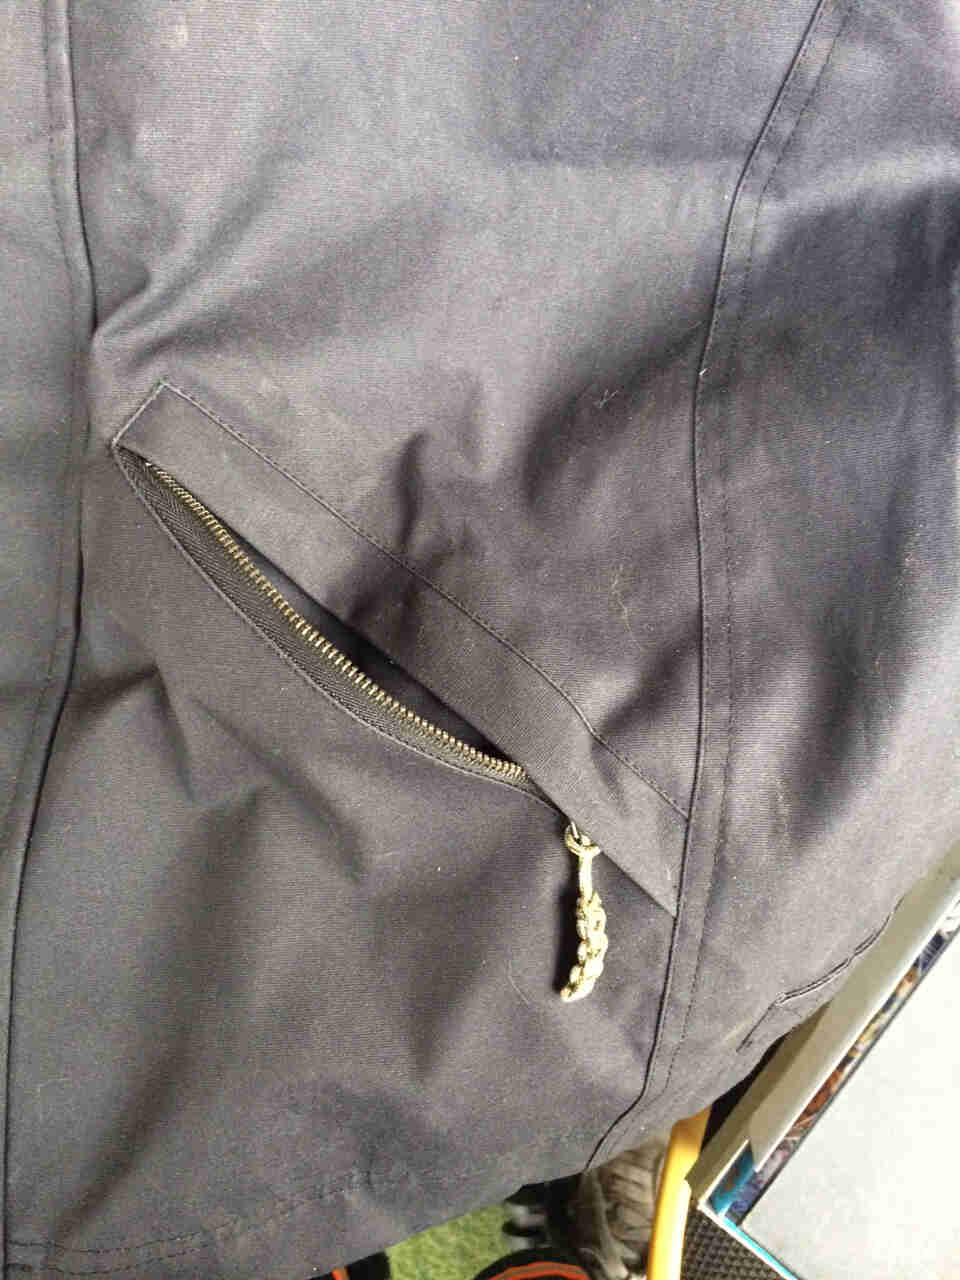 Surly Winter Riding Jacket - hand warmer pocket detail - downward view